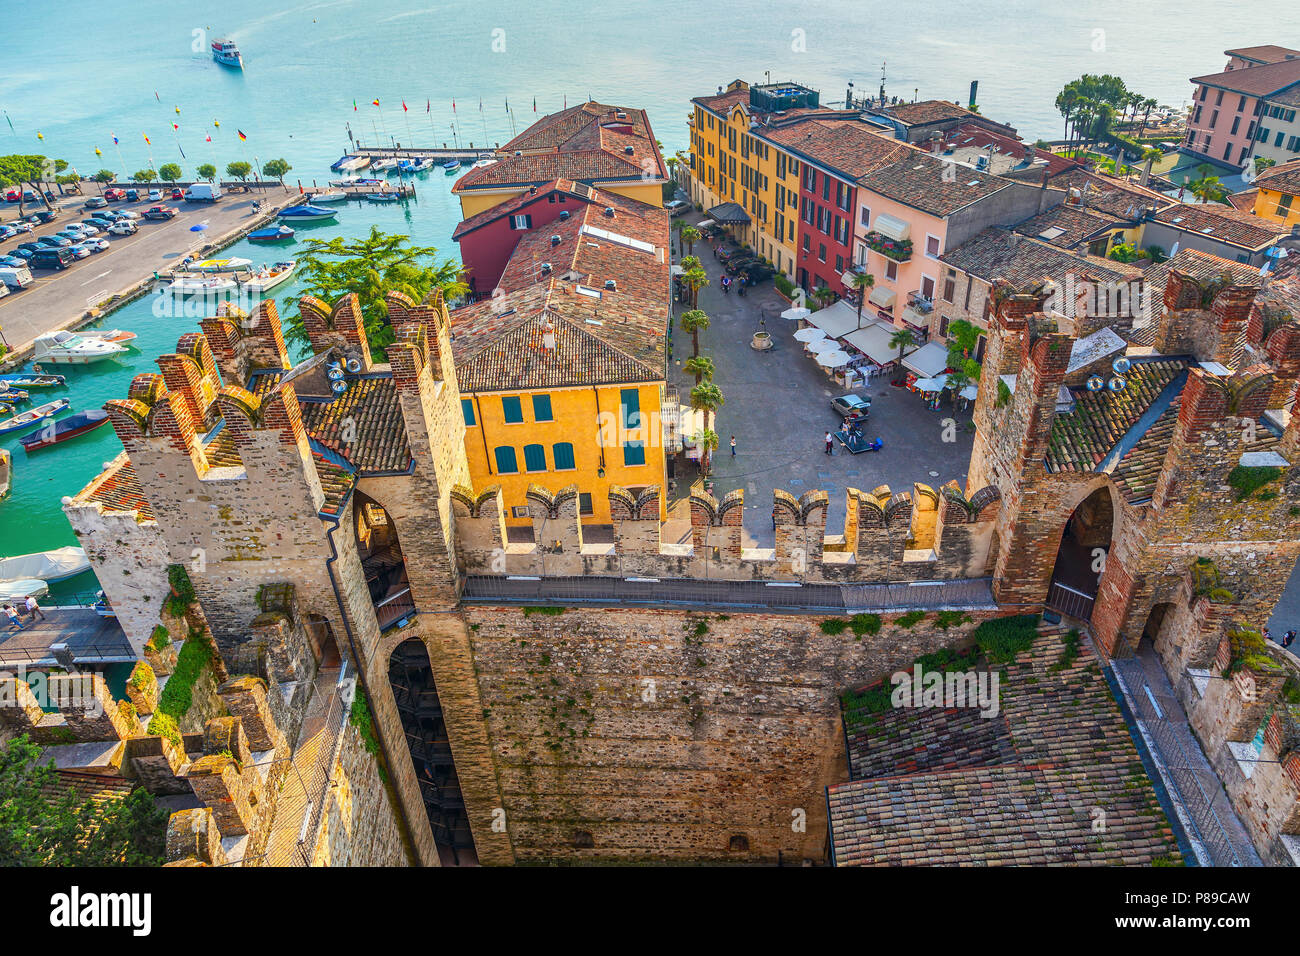 The Italian town of Sirmione. View from the tower of the castle of ...